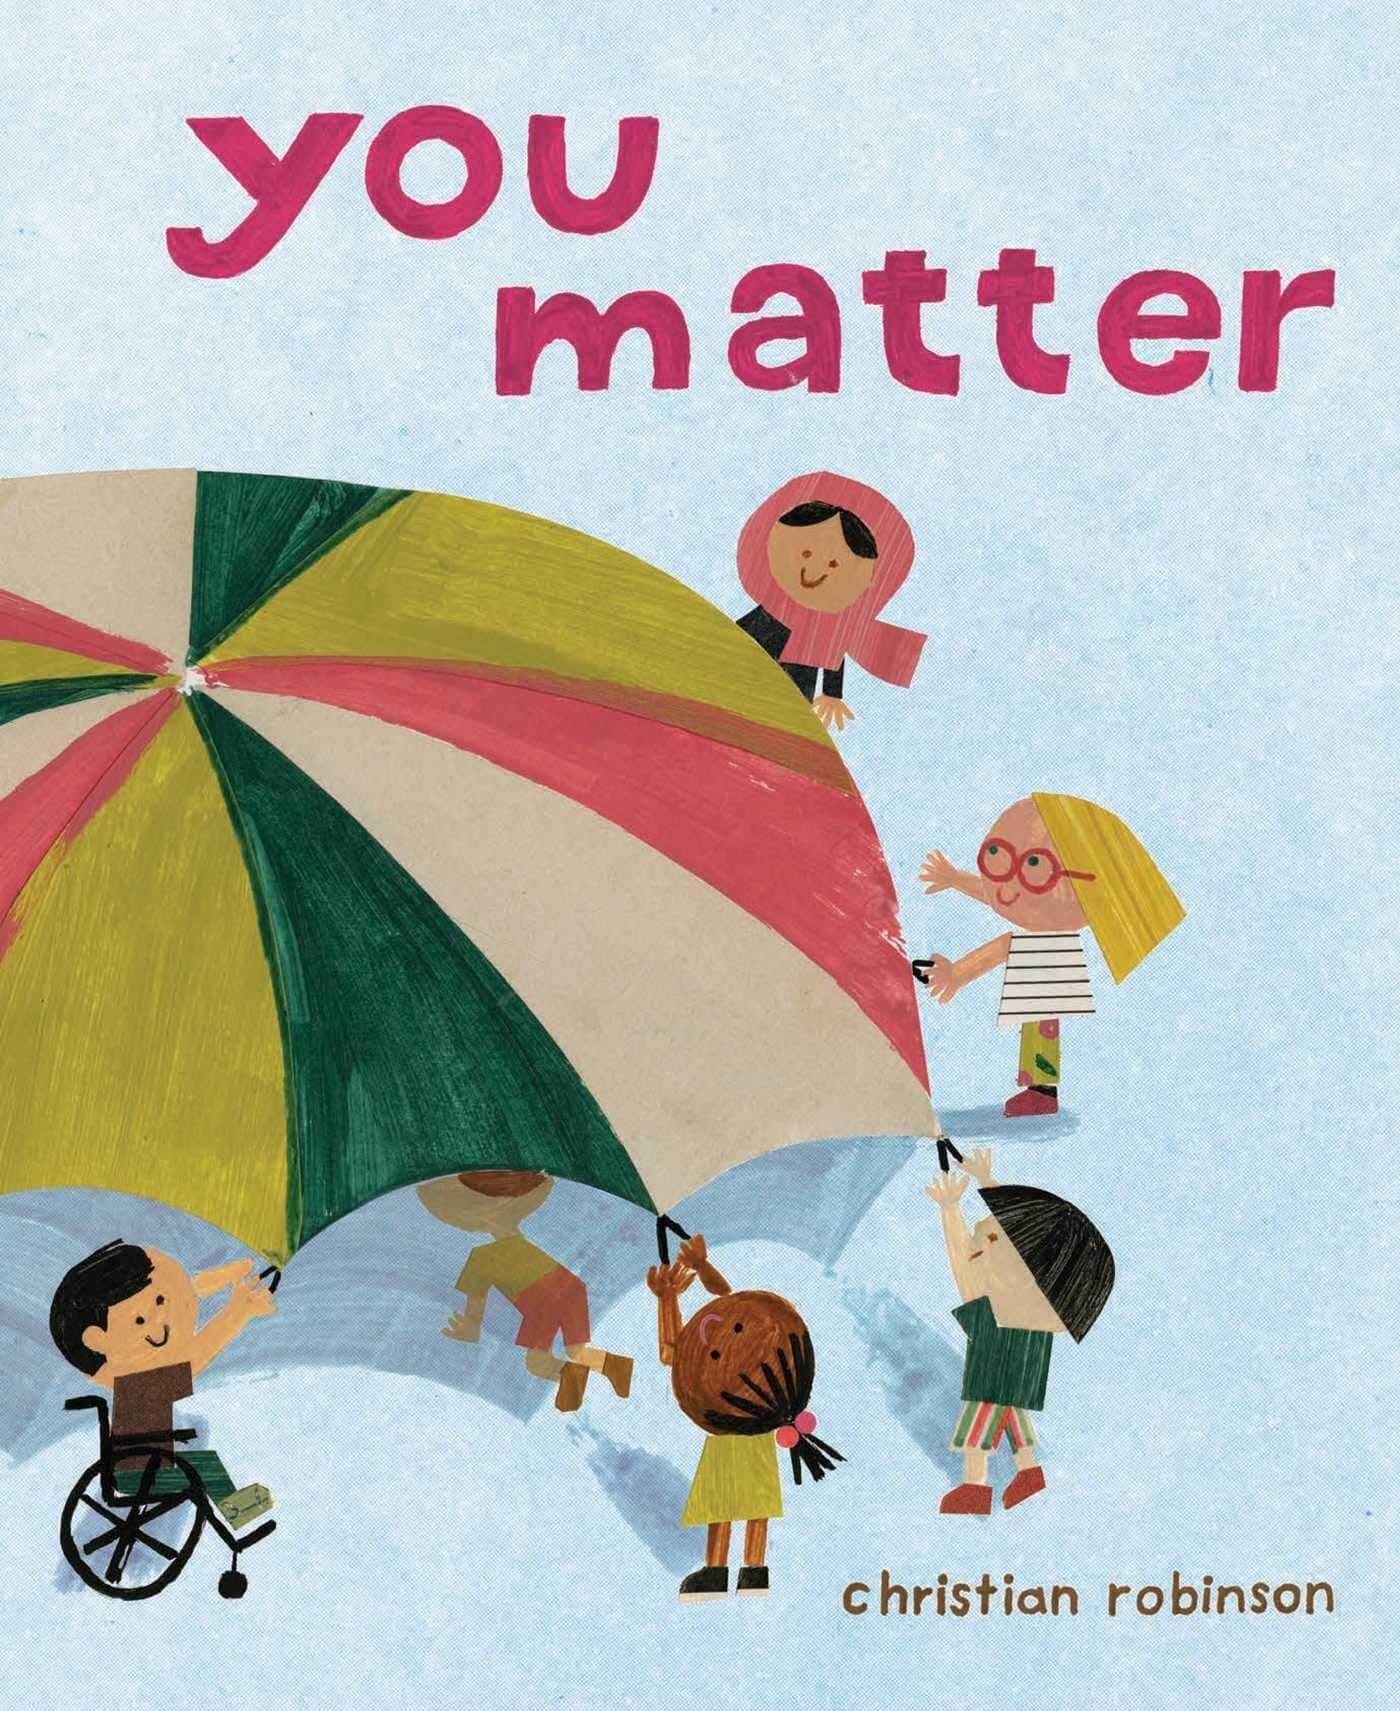 You Matter Hardcover by Christian Robinson - Ages 4 to 8